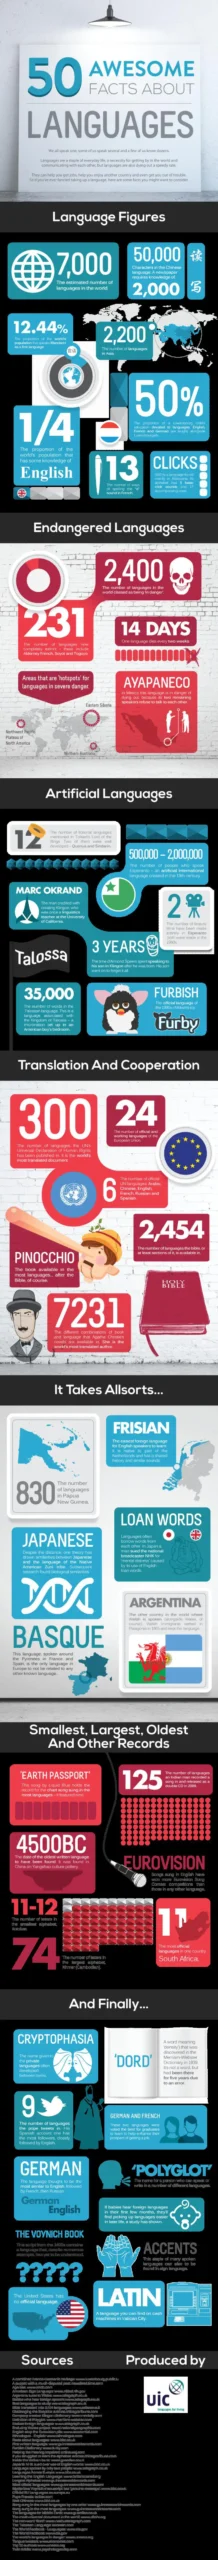 Interesting Facts About Languages Of The World [InfoGraphic]
